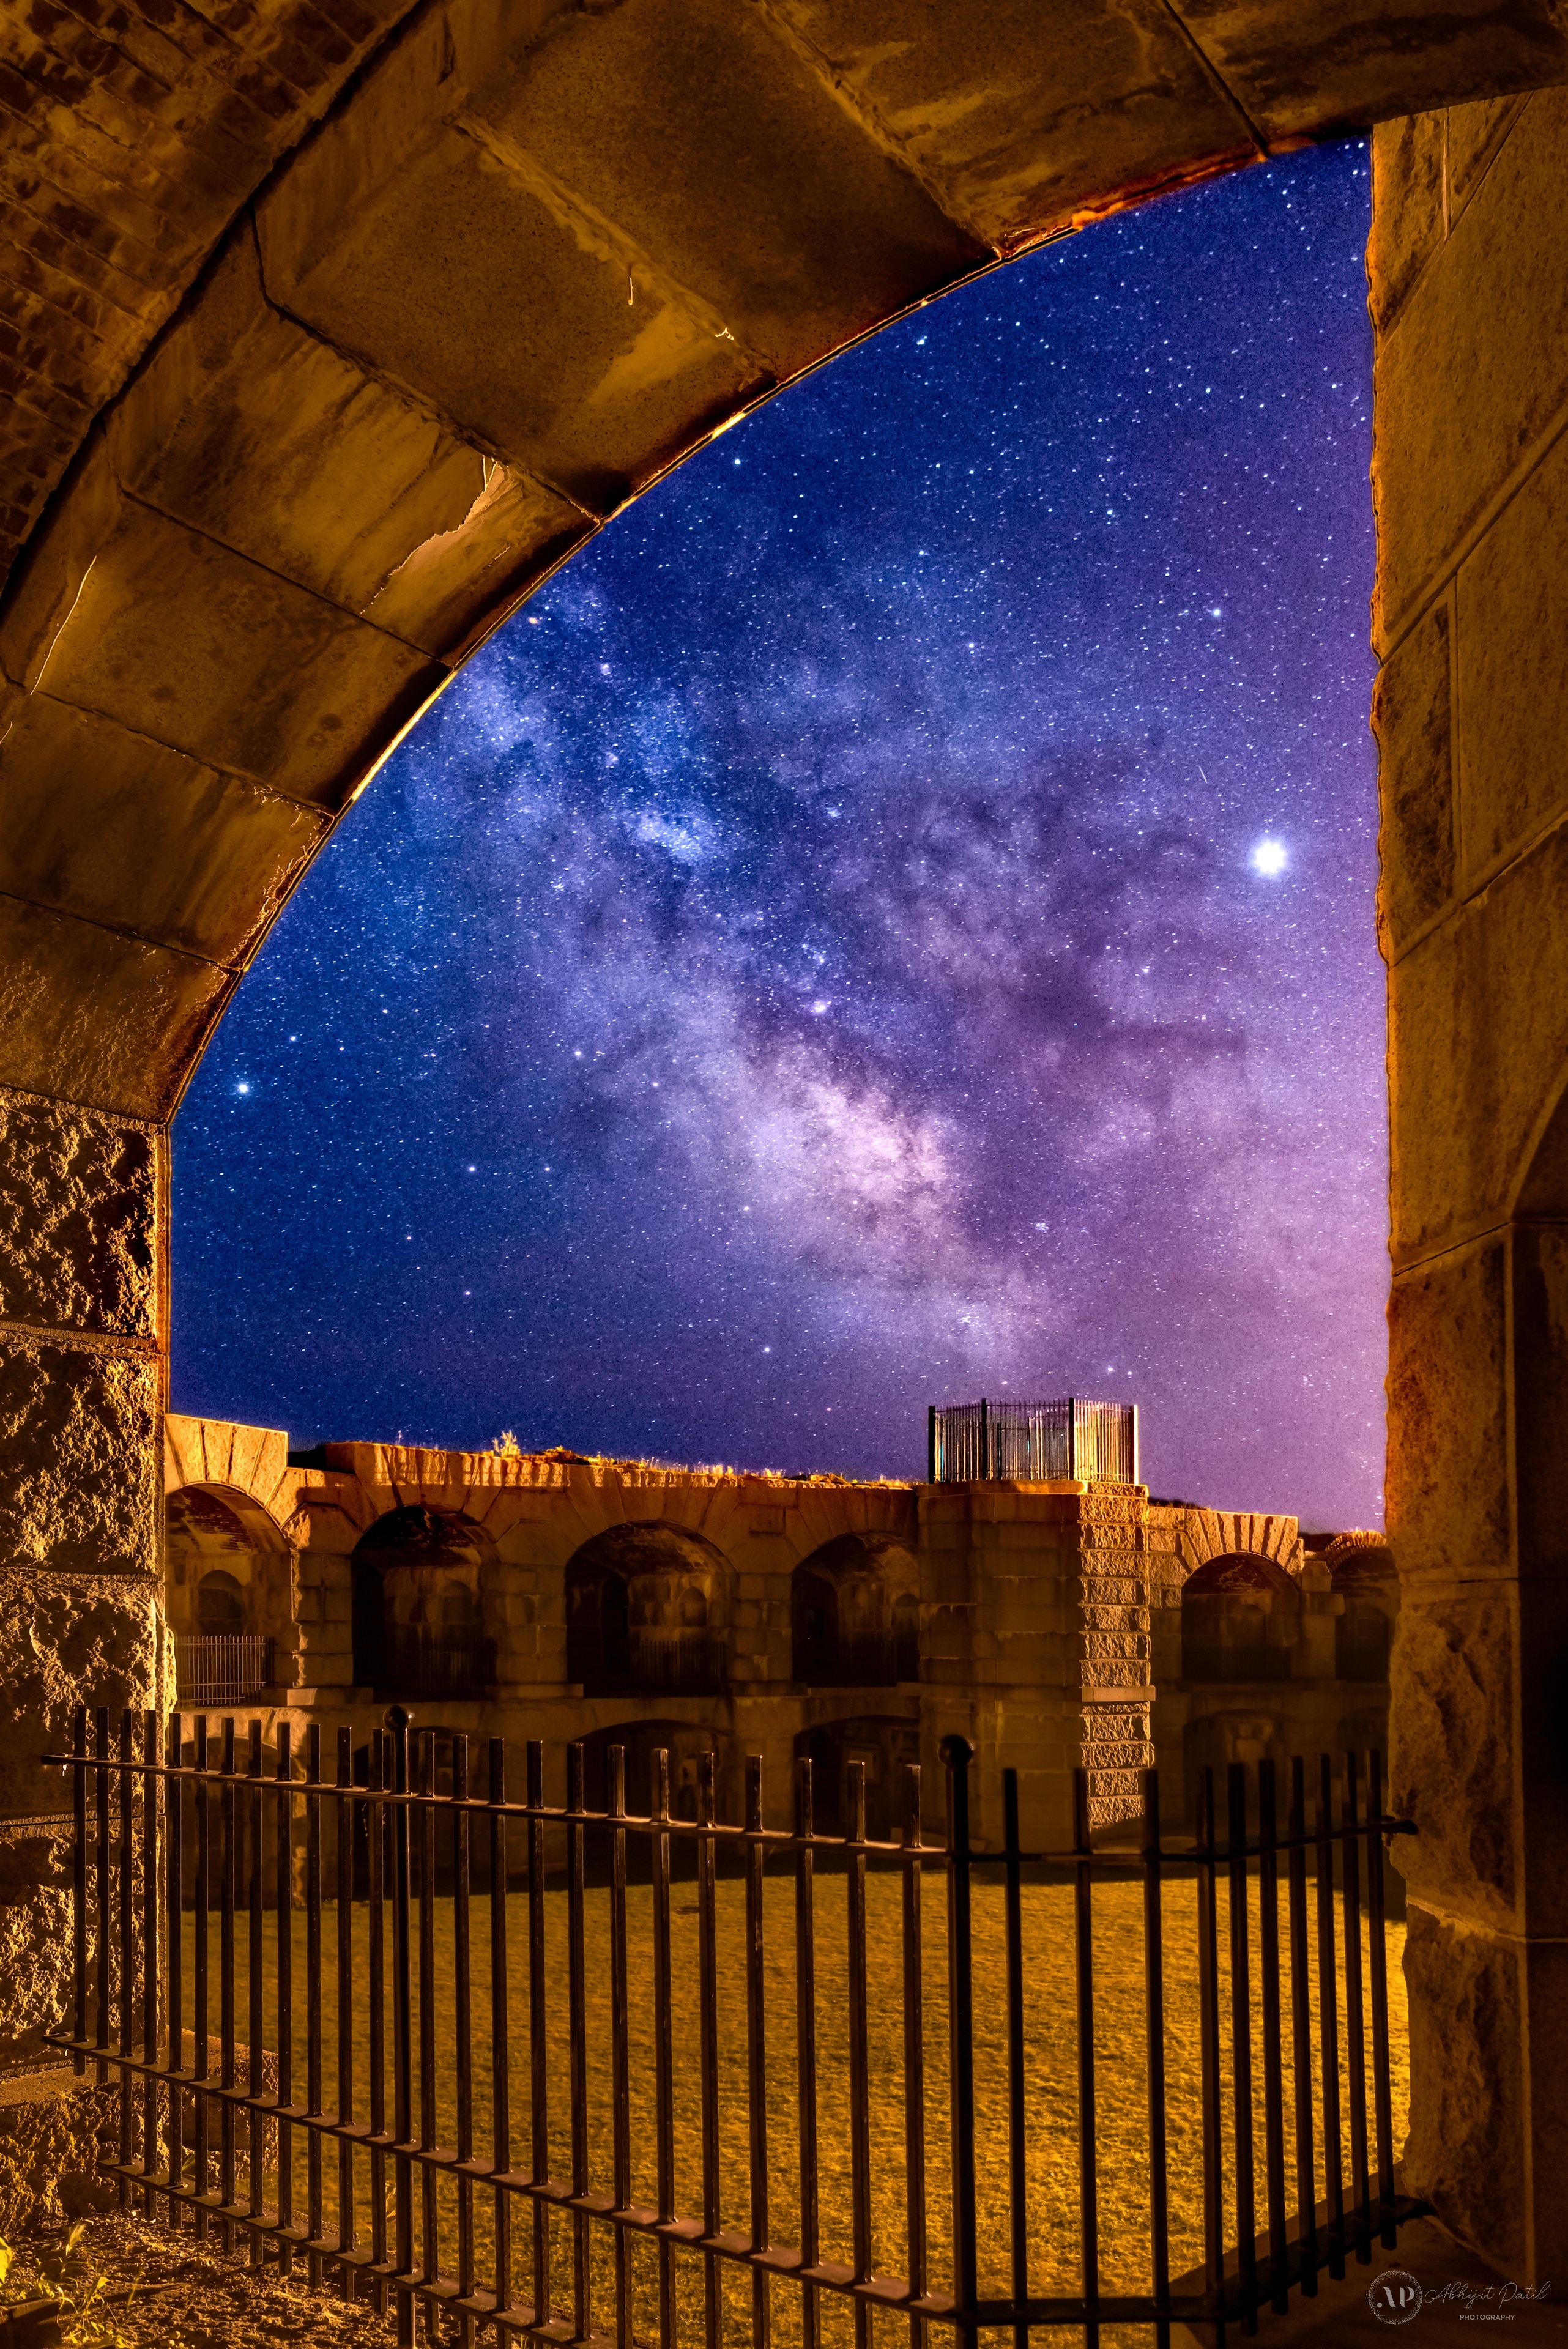 This photo is very dear to heart as it captures two elements from History. The Fort and the light from the Stars which is ancient than life forms on Earth. It was surreal to photograph the two. 
#NaturePhotoContest #stars #milkyway #nightphoto #history